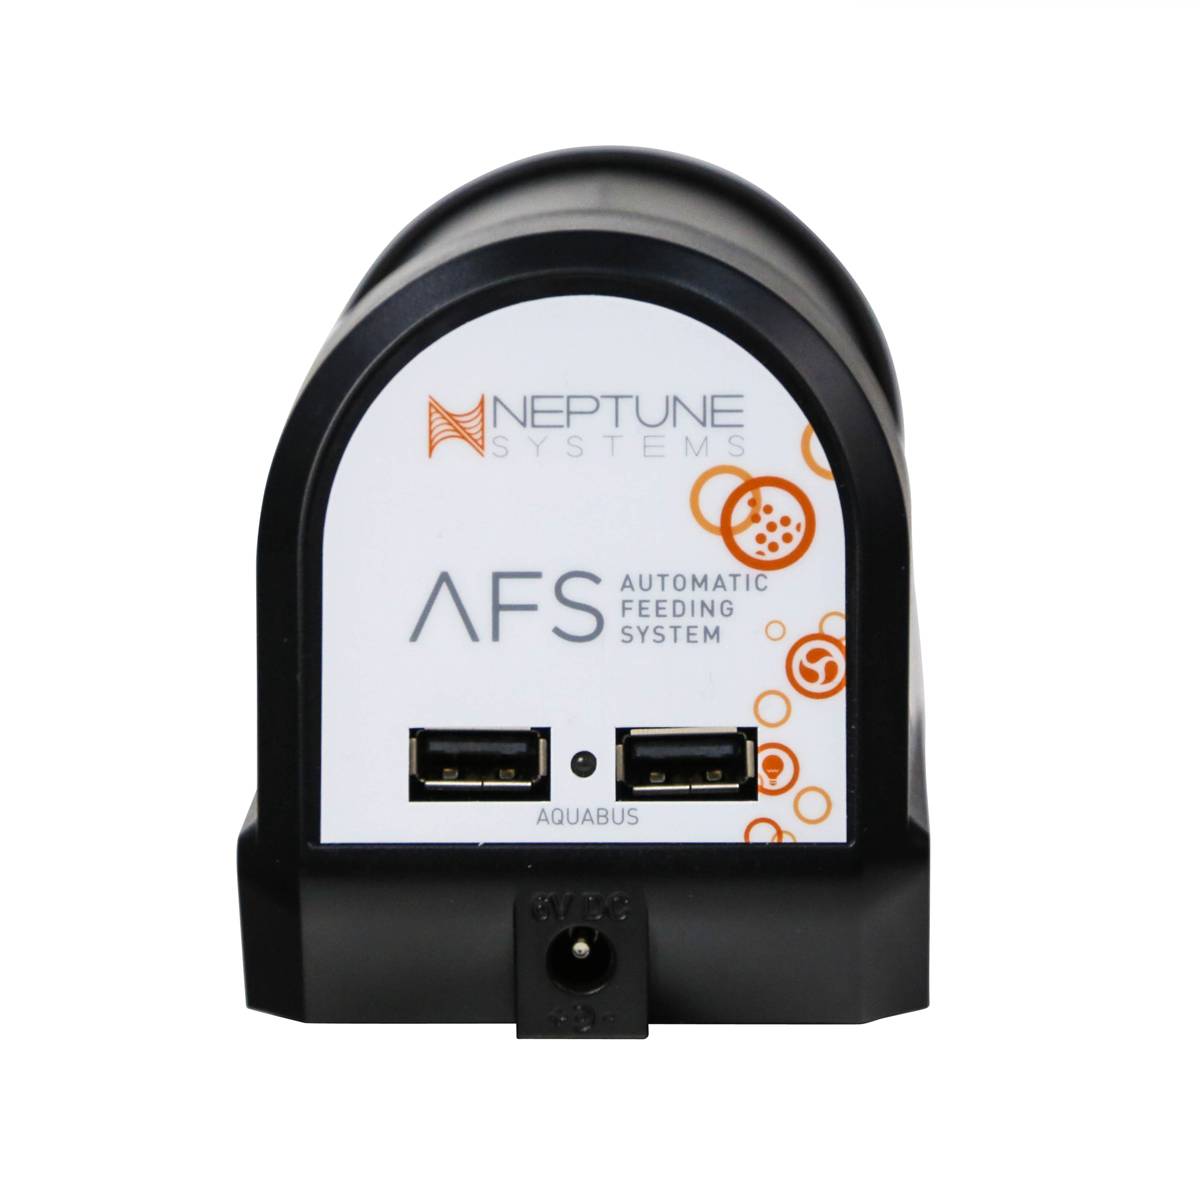 Automatic Feeding System Apex (AFS) - Neptune Systems - Neptune Systems